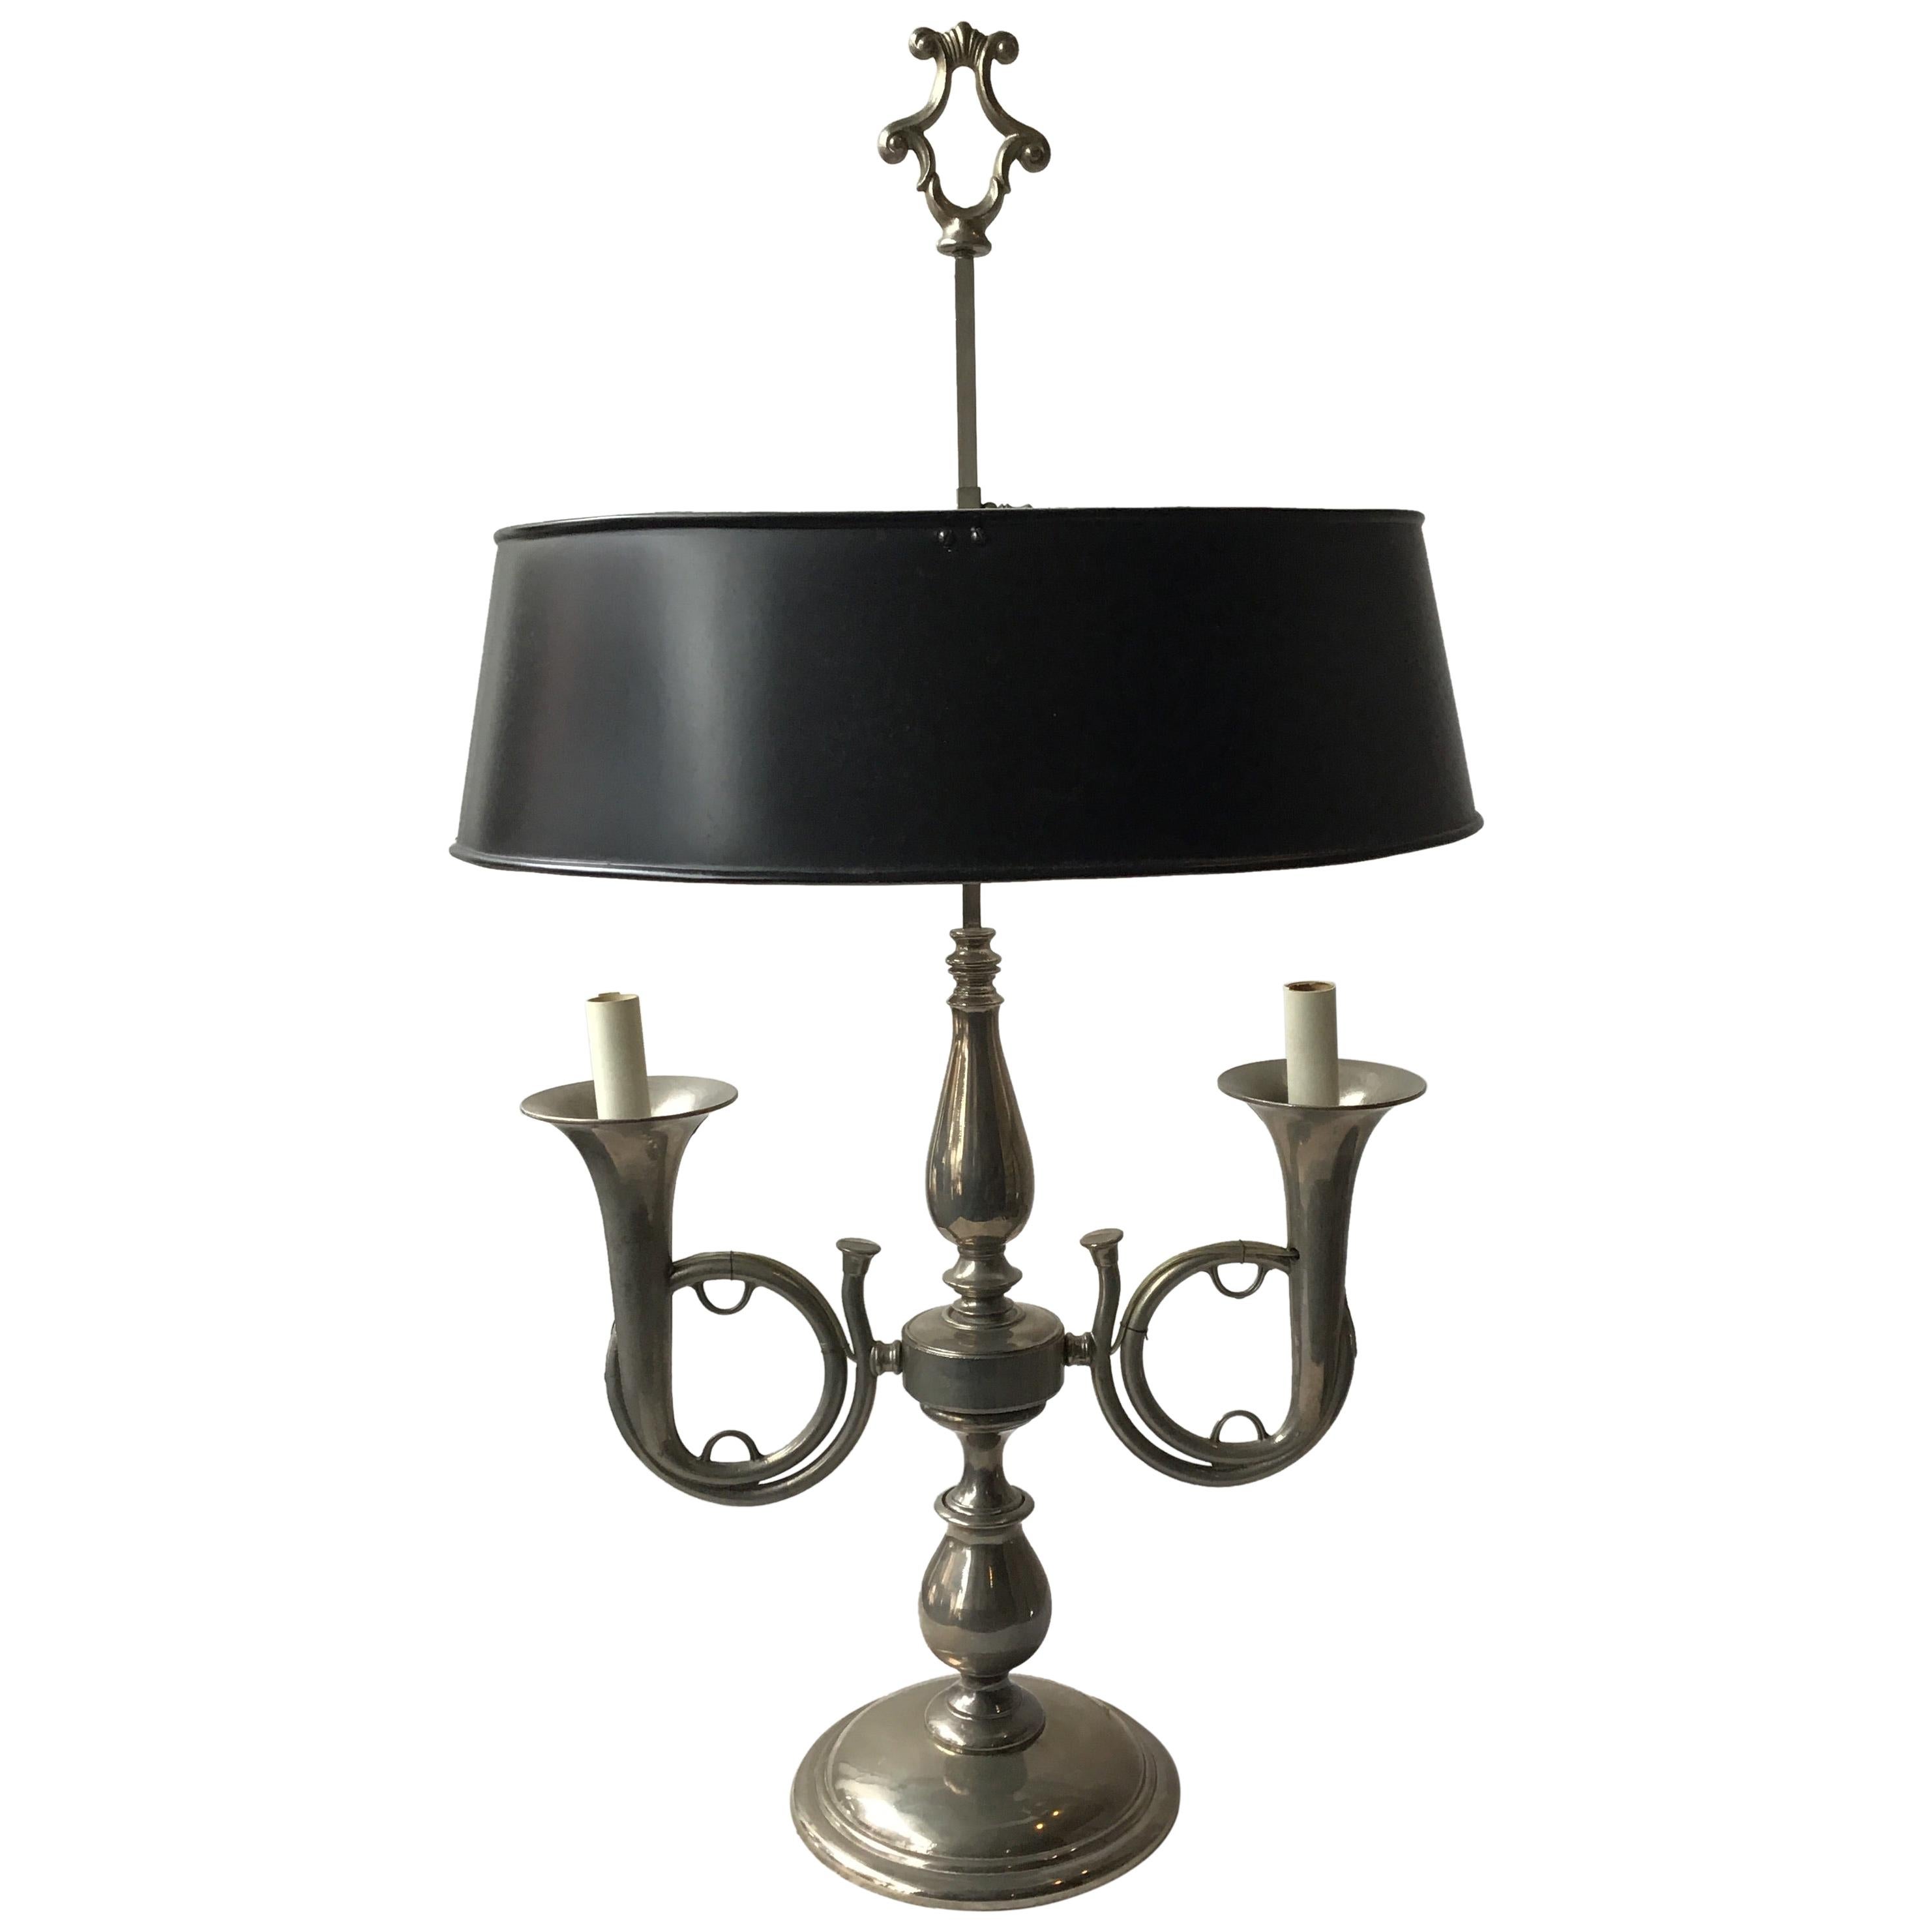 1970s Pewter Trumpet Lamp With Adjustable Tole Shade For Sale